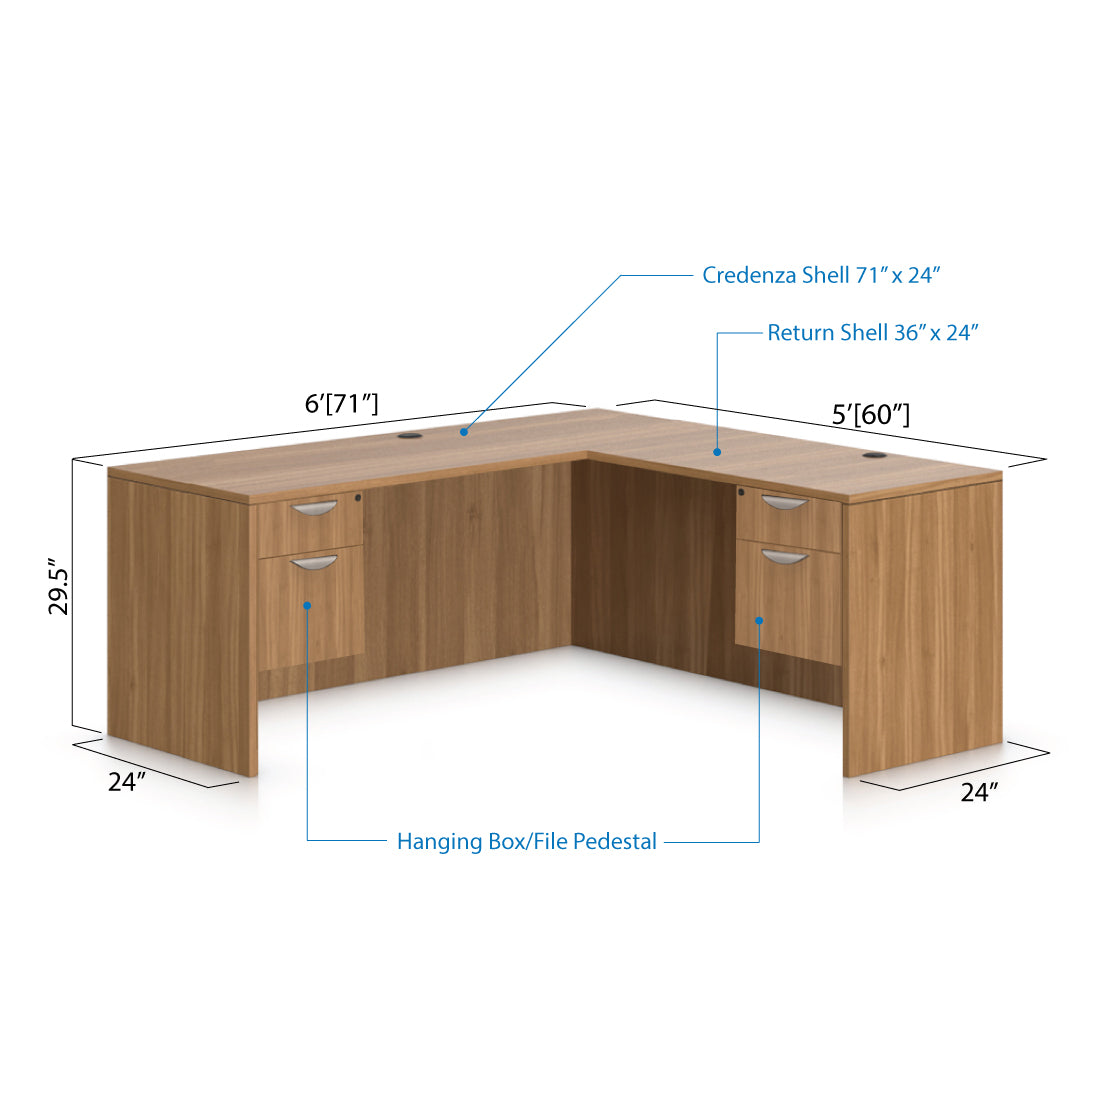 L71B - 6' x 5' L-Shape Workstation(Credenza Shell with Two Hanging B/F Pedestal) - Kainosbuy.com